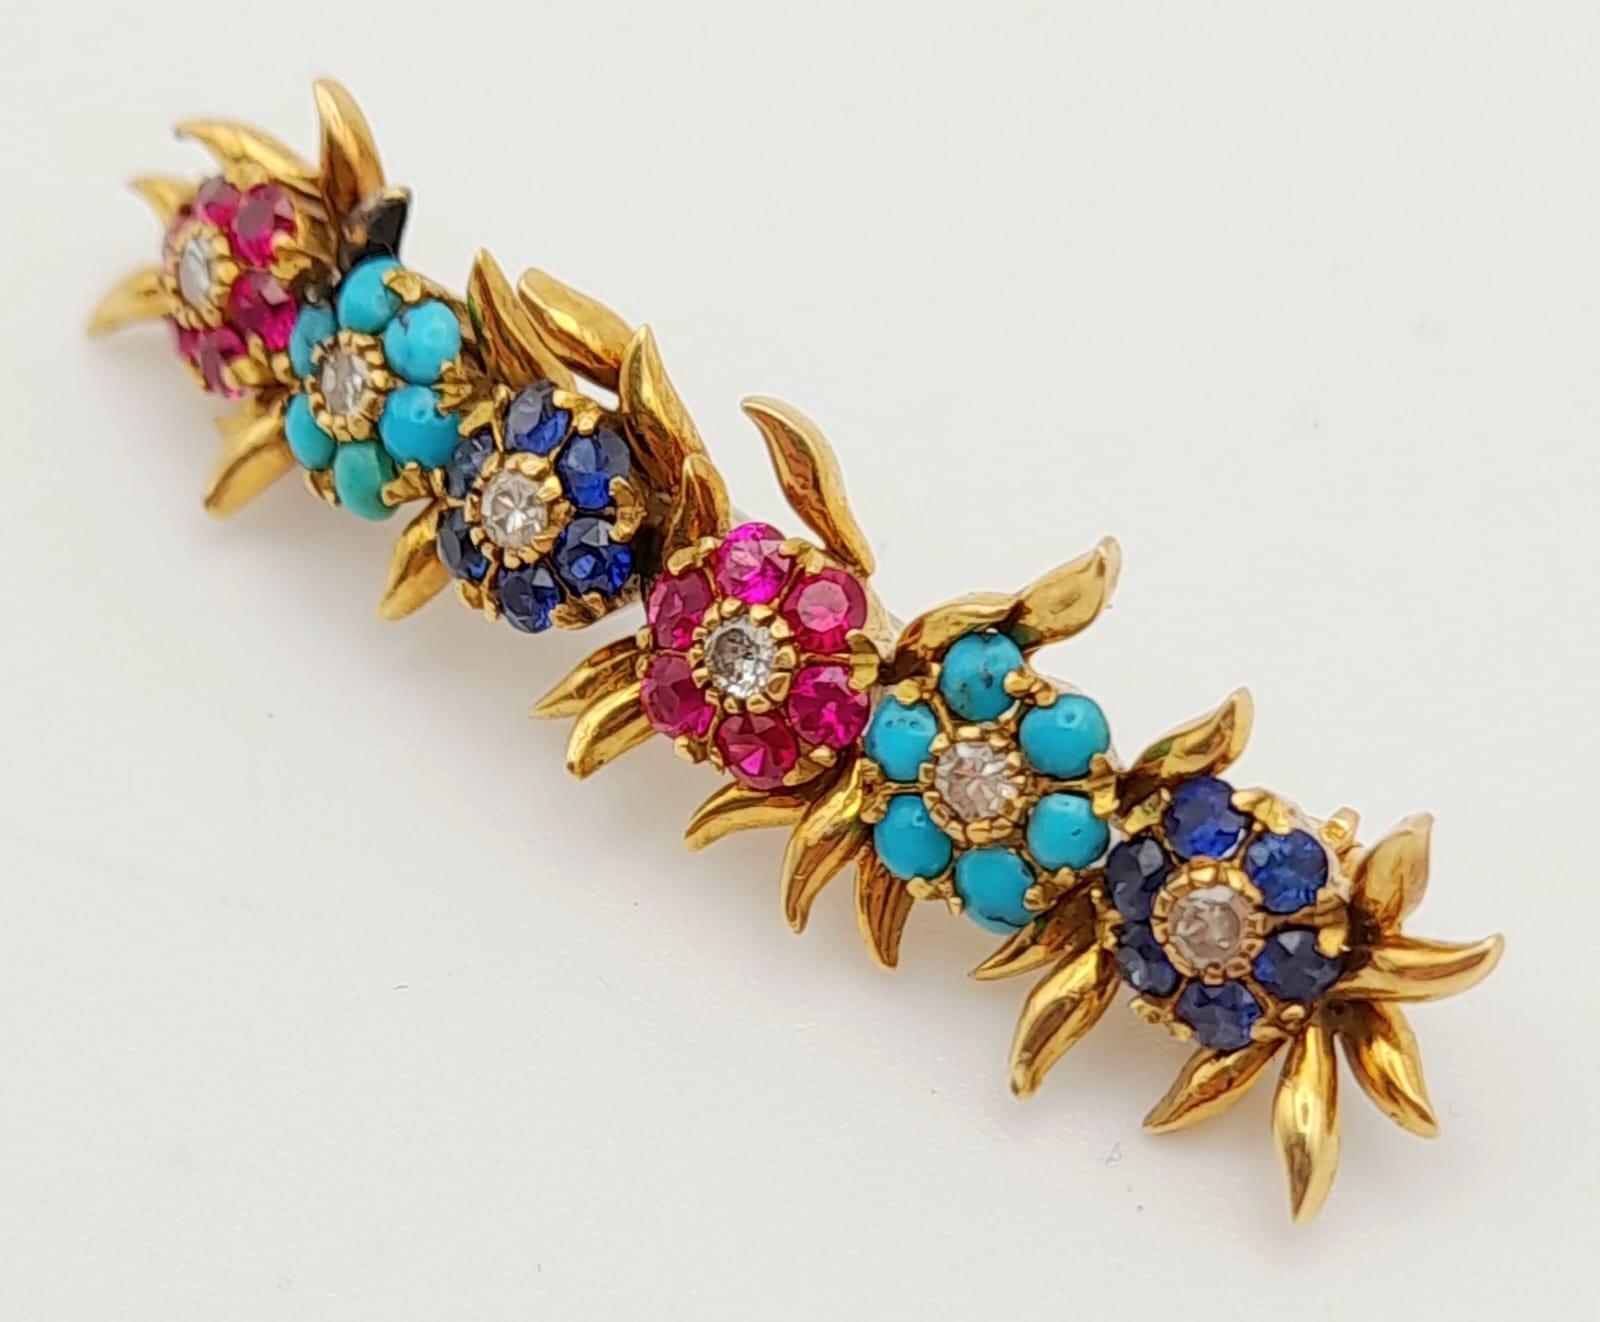 A Beautifully Crafted Antique High Karat Gold, Ruby, Turquoise, Sapphire and Diamond Bar Pin/Brooch. - Image 2 of 7